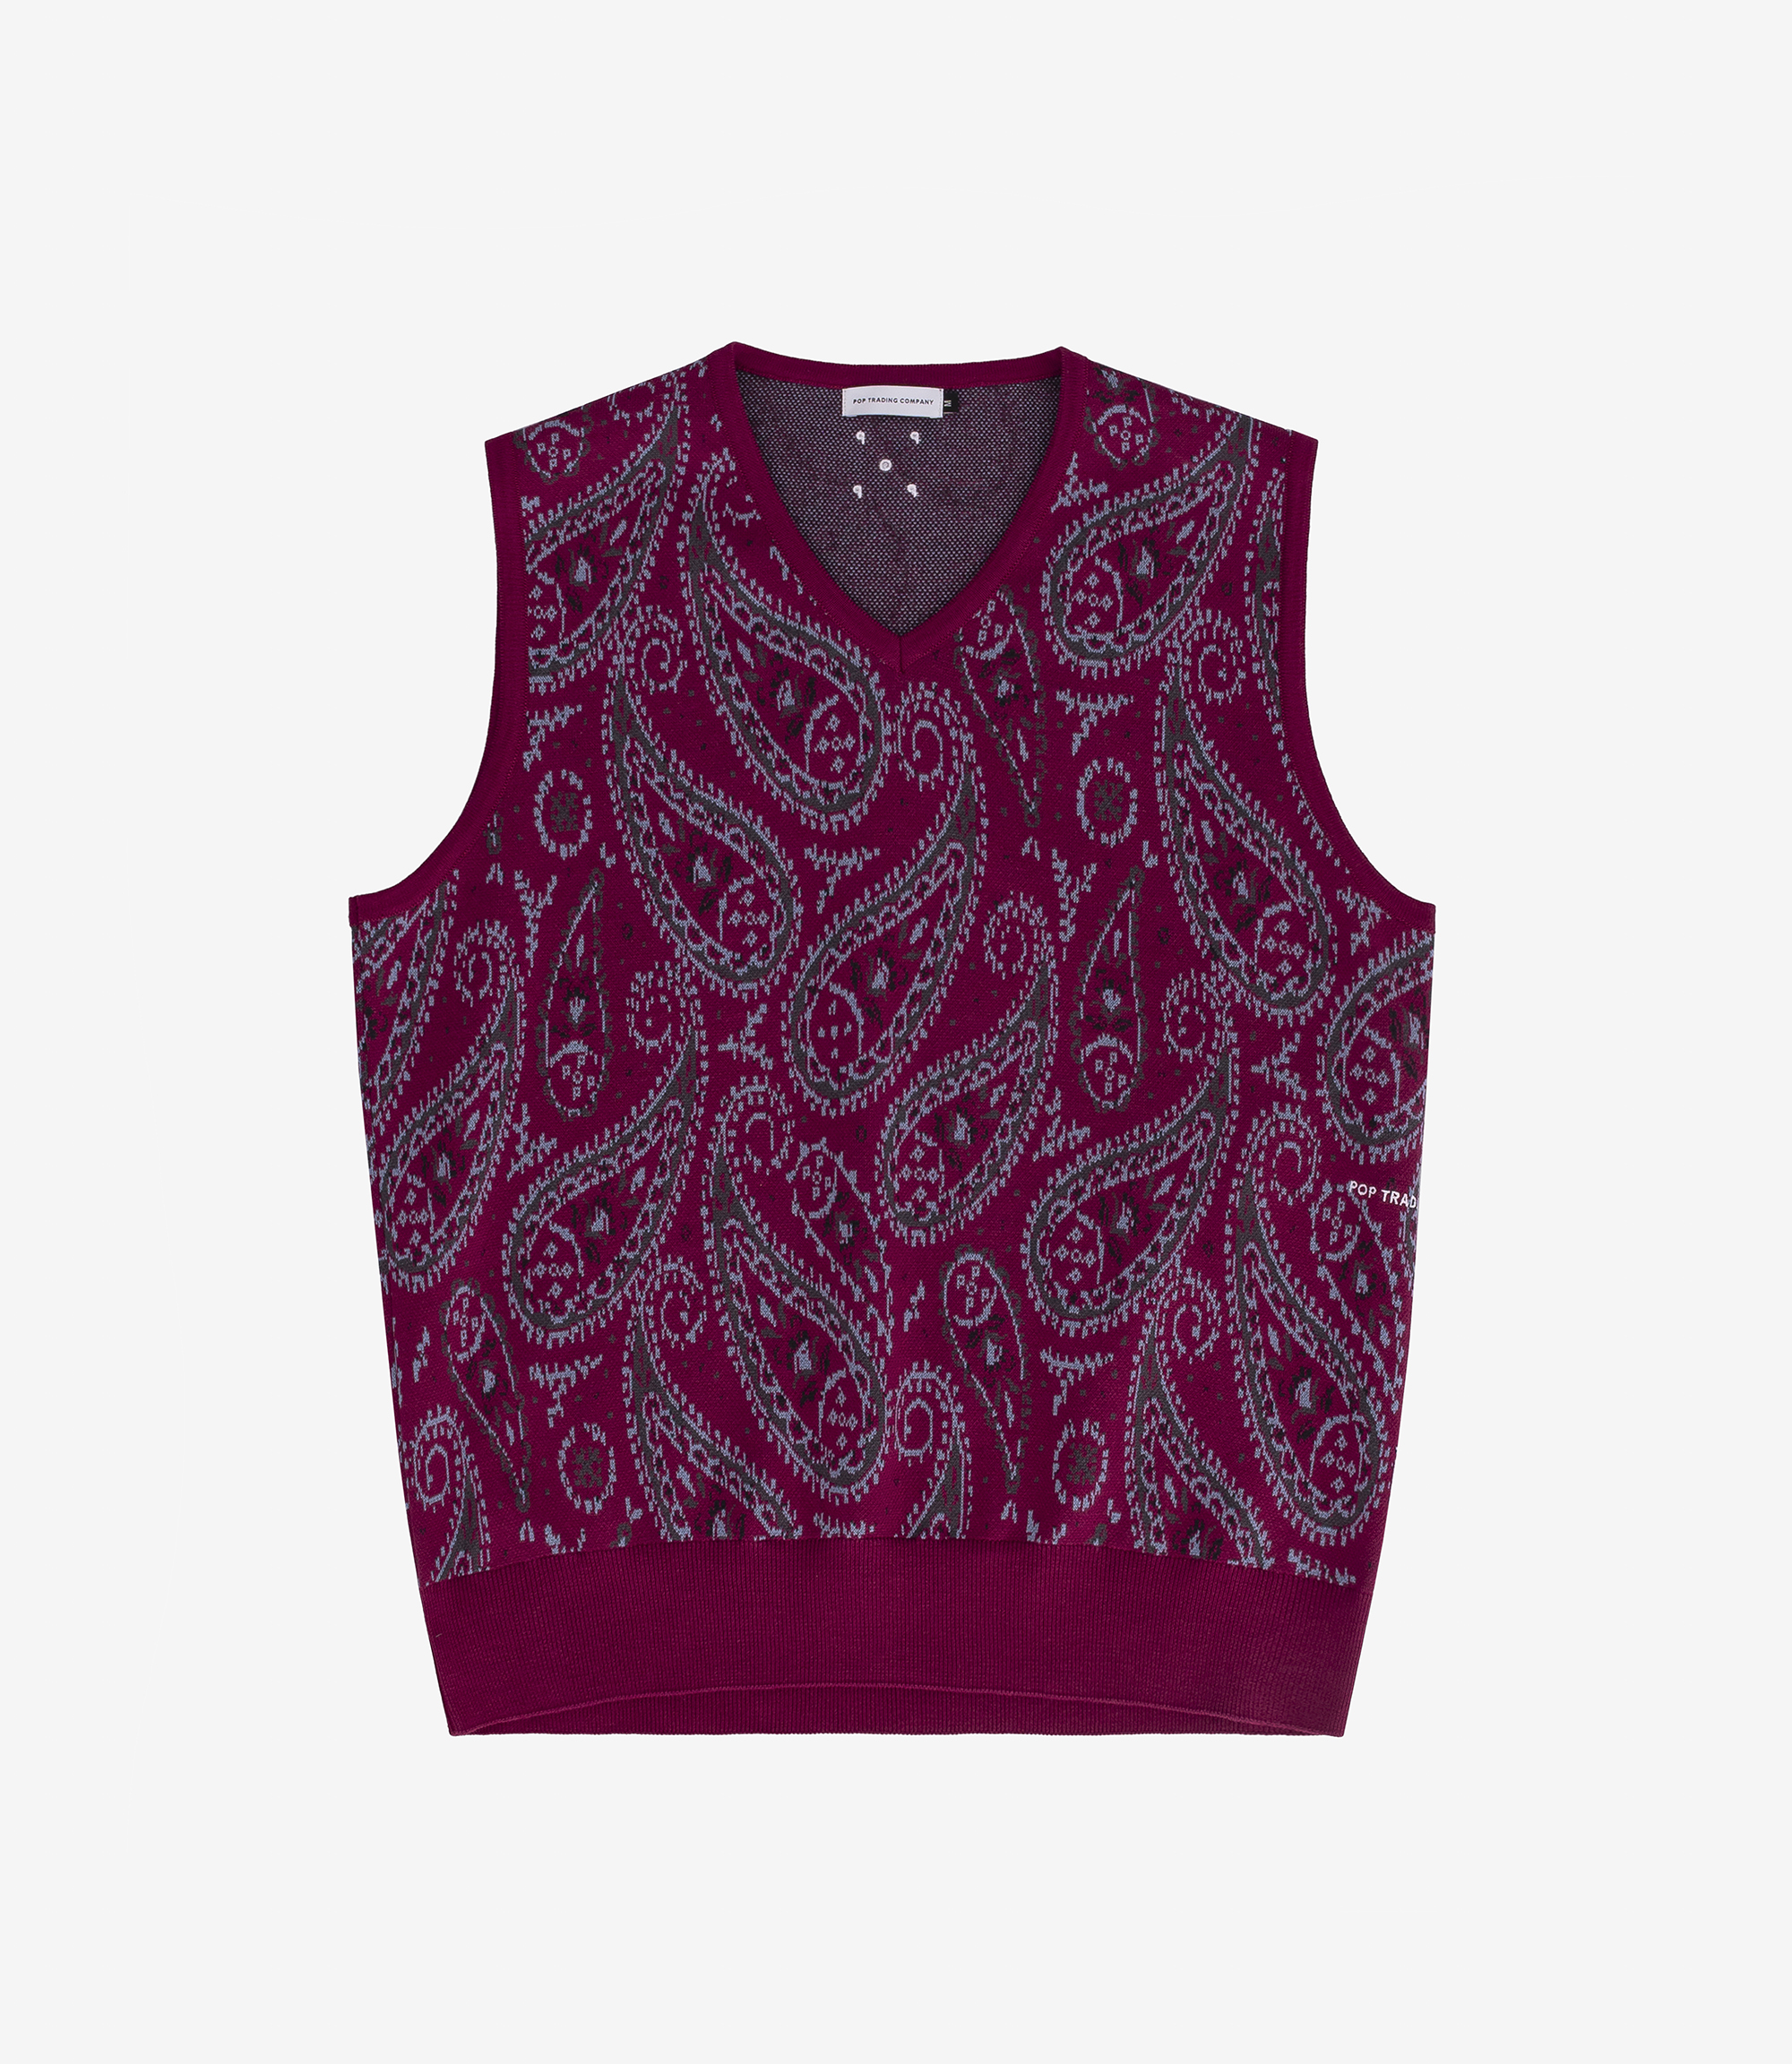 Shop Pop Trading Company Knitted Spencer Raspberry at itk online store